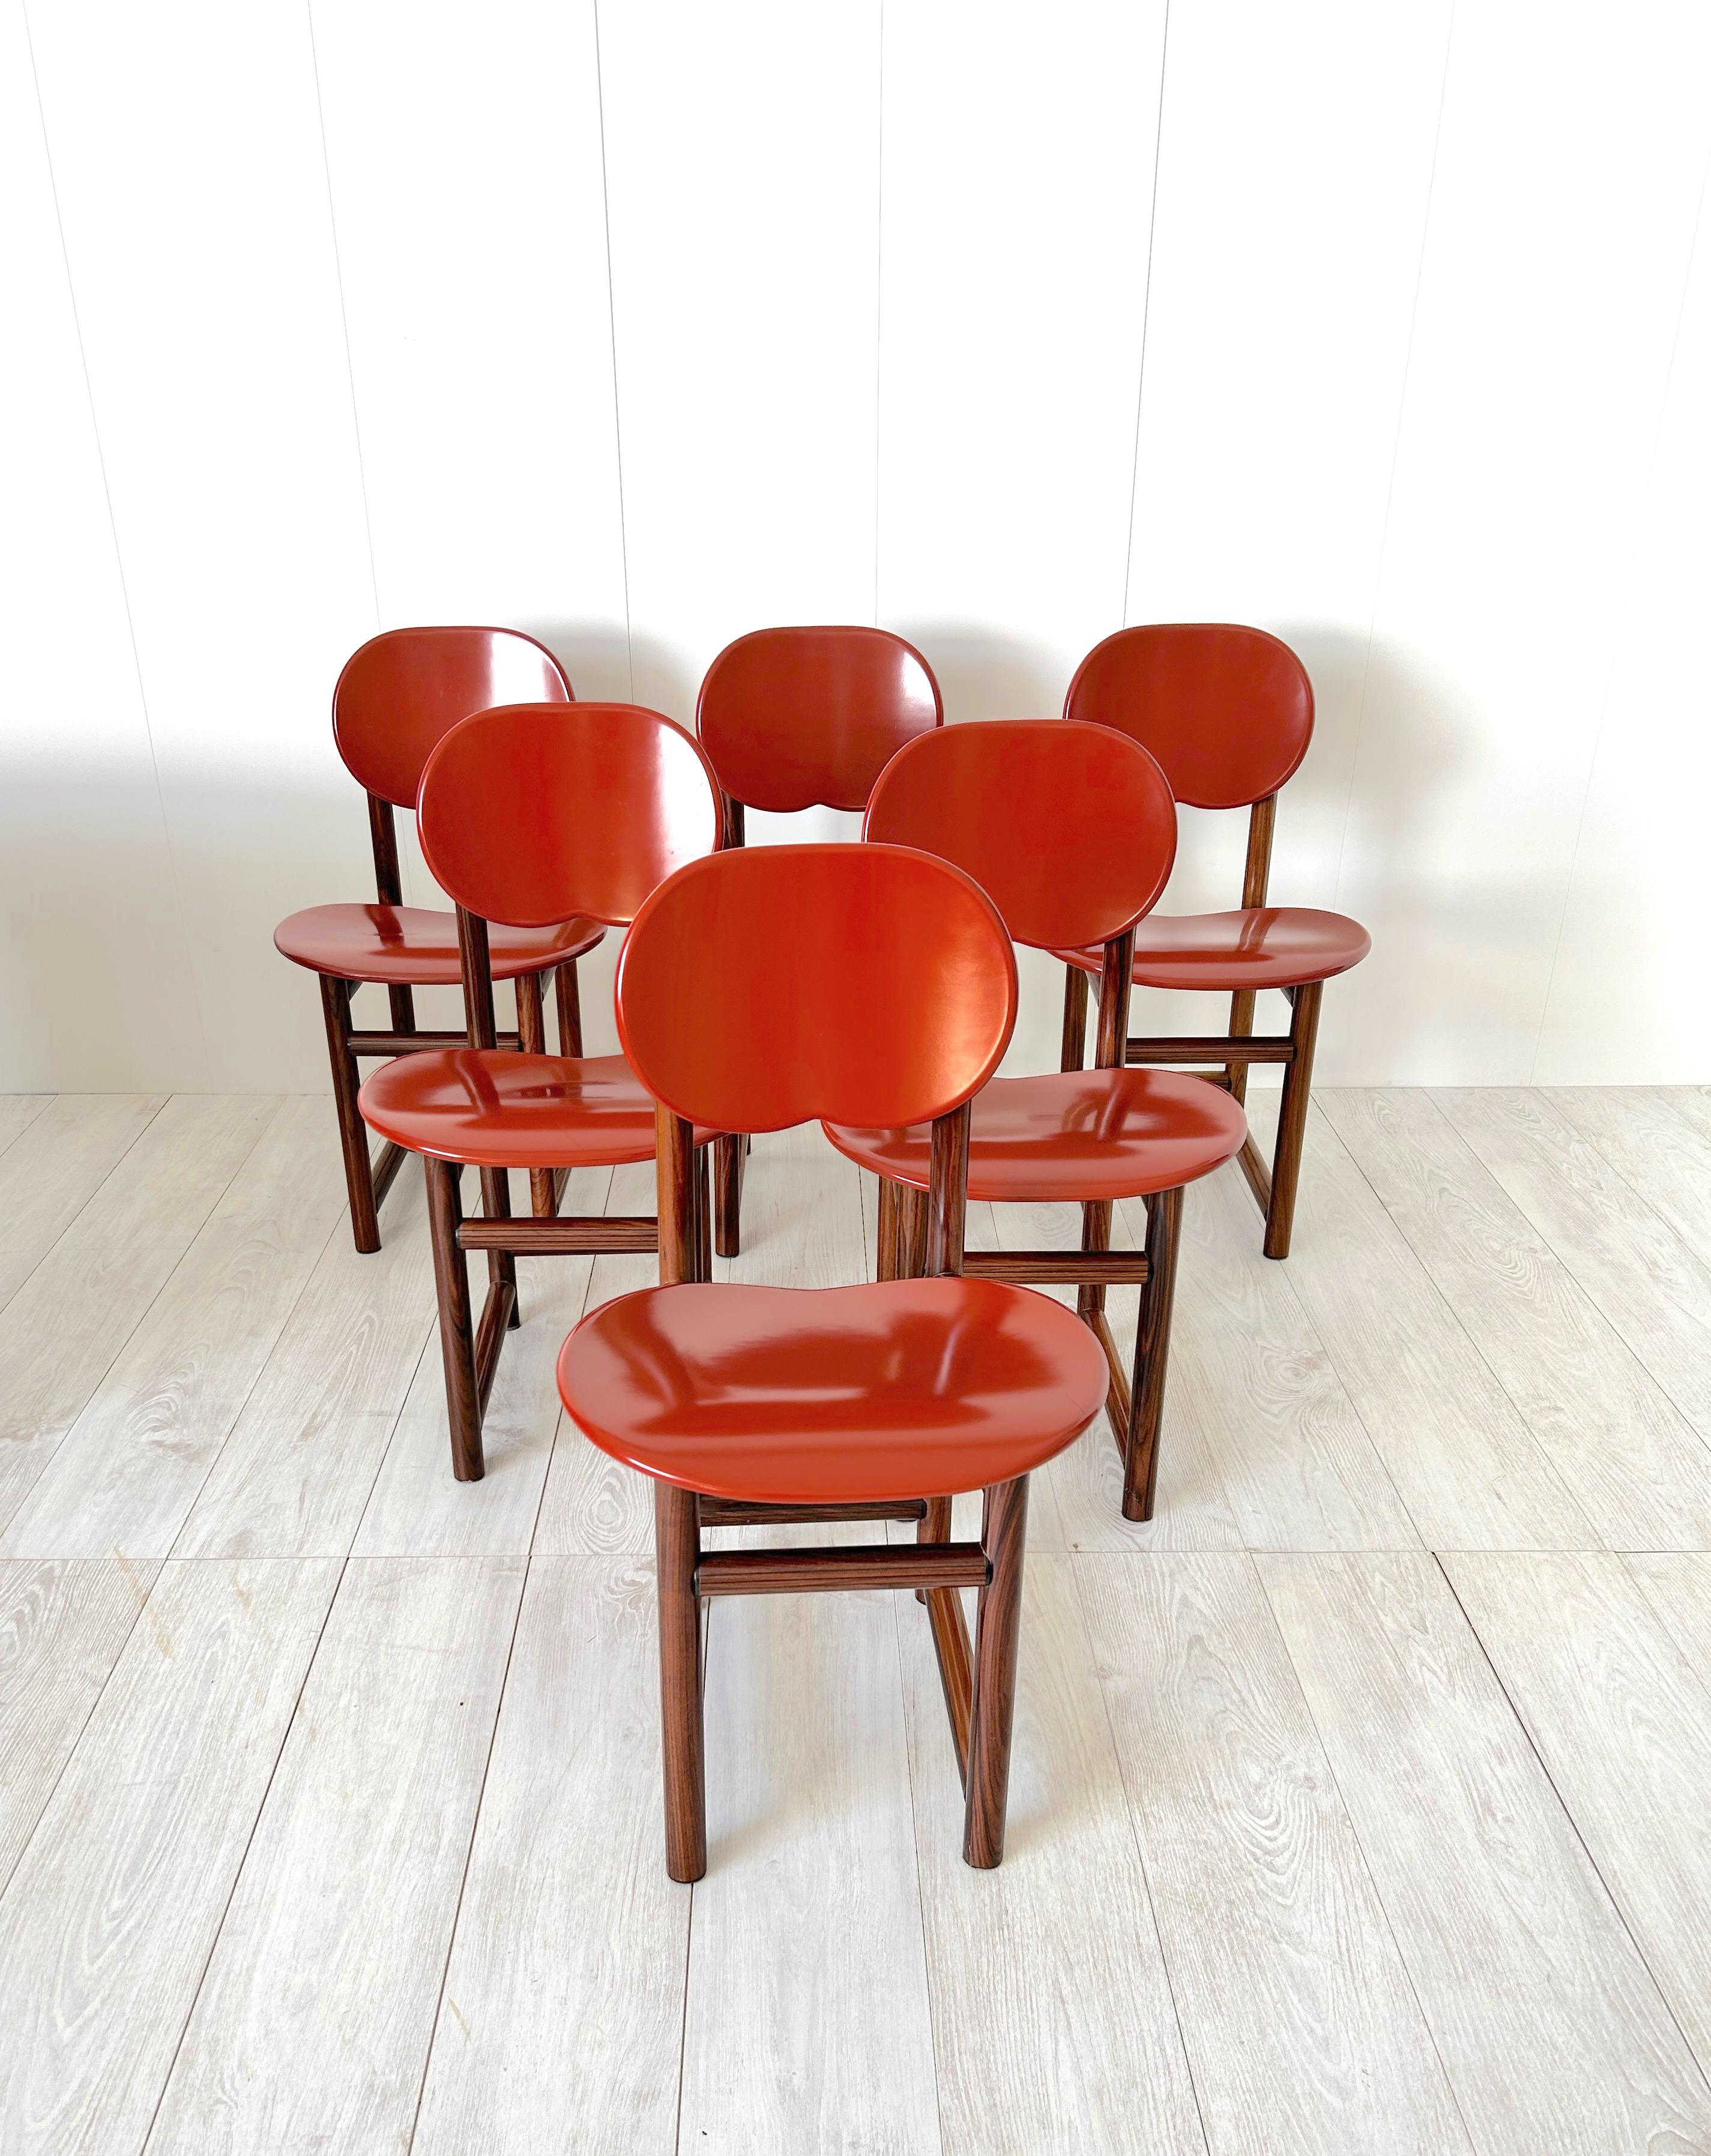 Rare set of six chairs by Afra and Tobia Scarpa for Max Alto.
Structure in solid wood turned in walnut with fillets of other essences, seat in glossy polyester lacquered wood.
The New Harmony series, launched in 1979, presents a unique line by